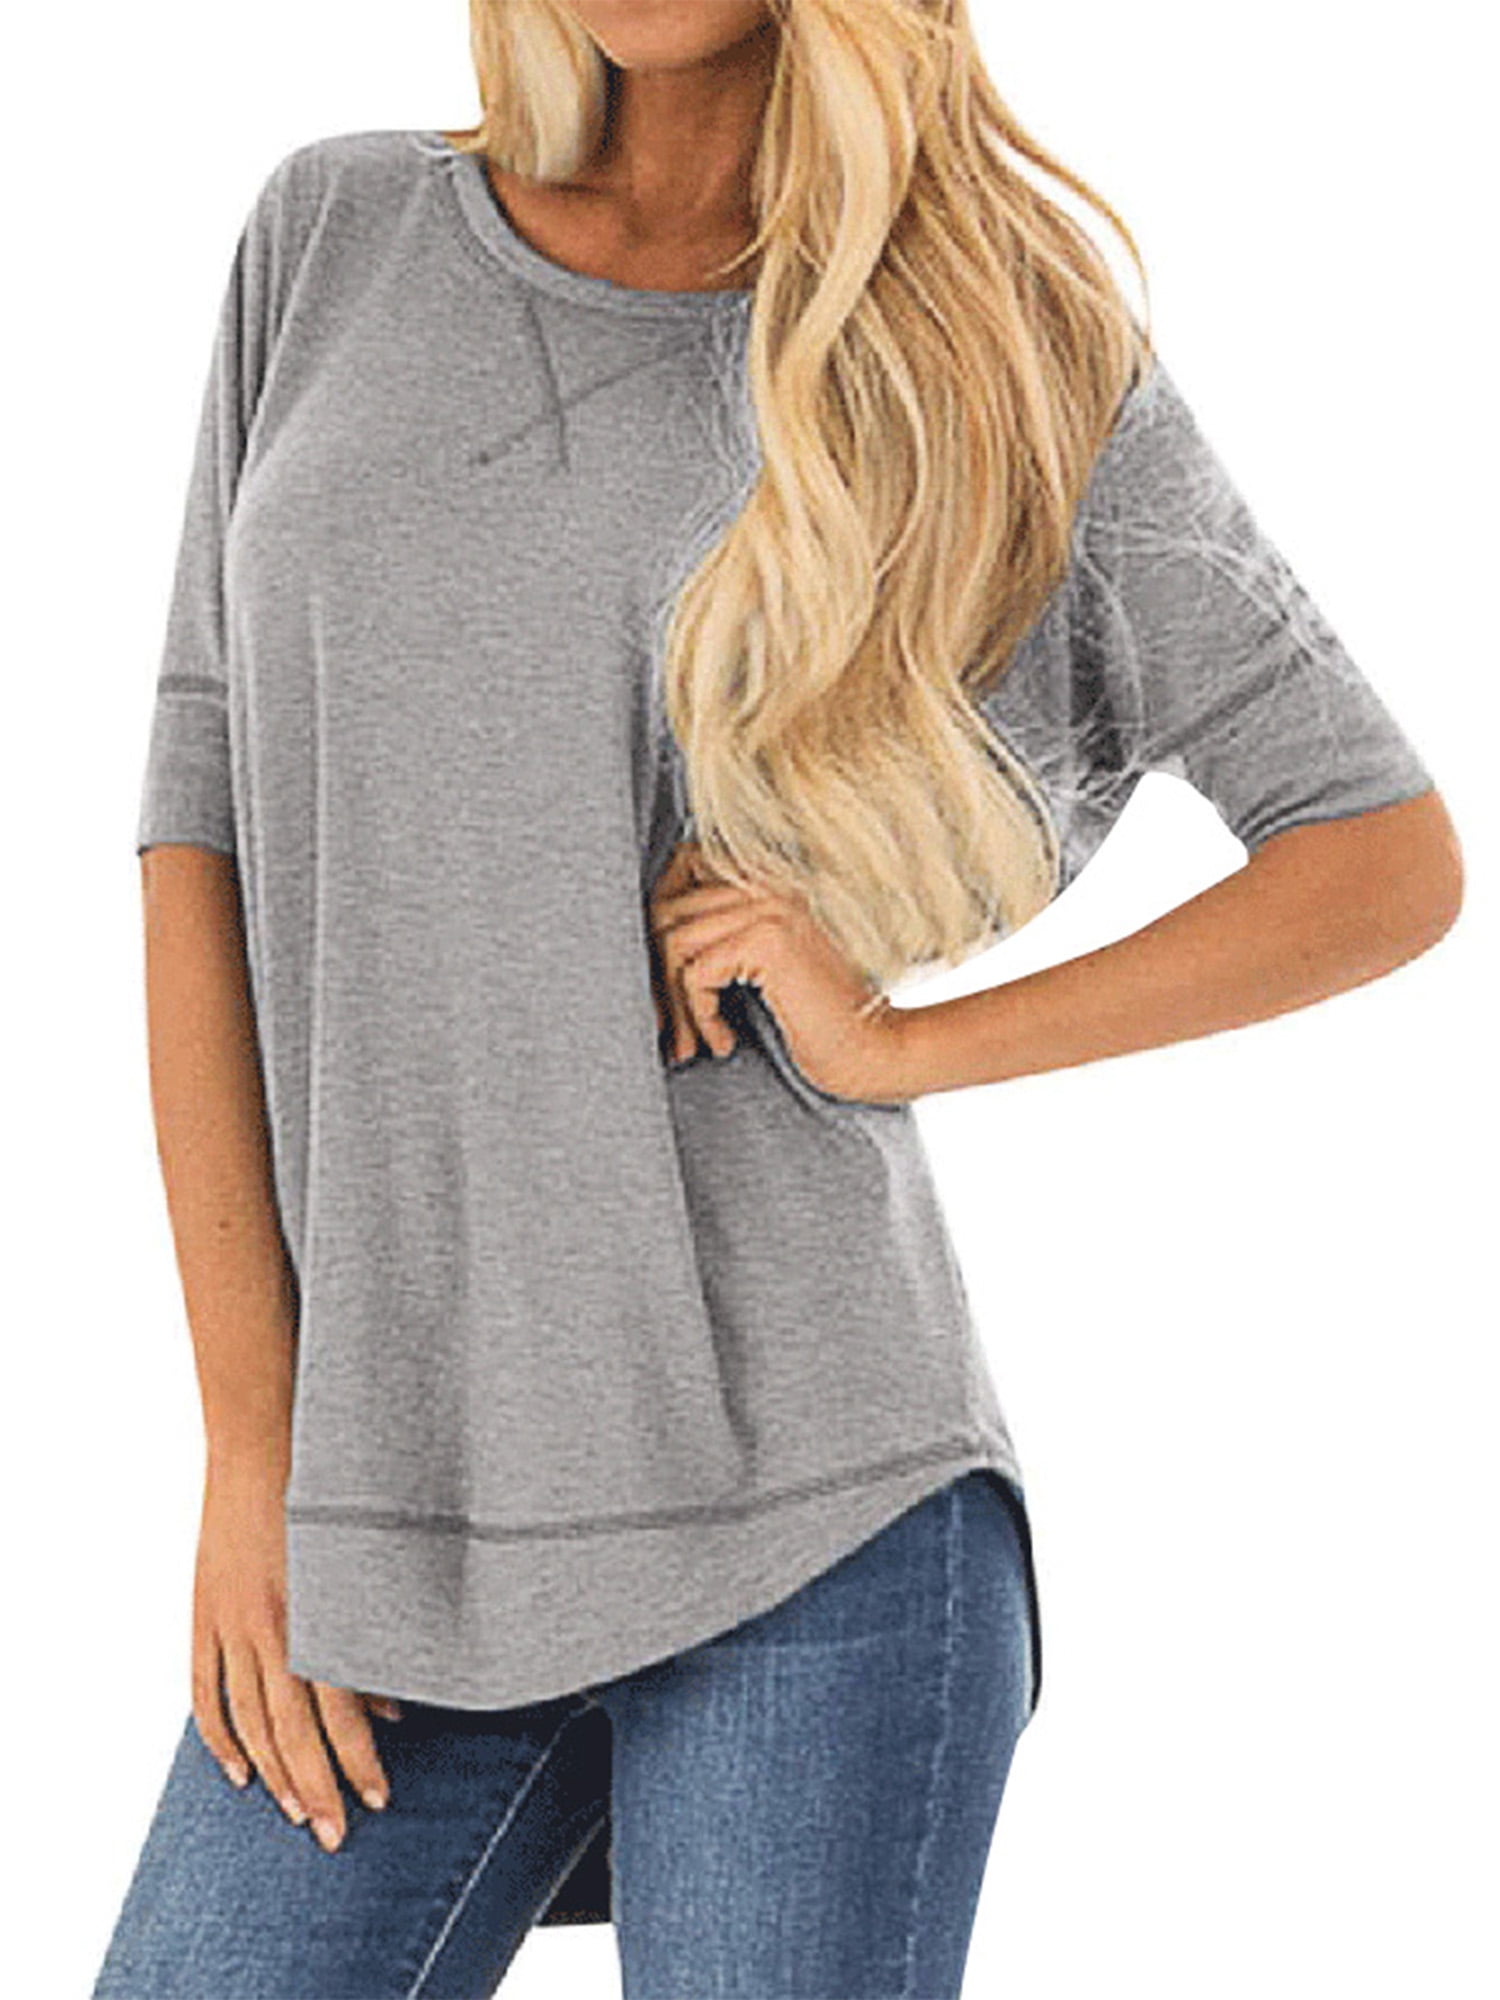 onlypuff Pocket Shirts for Women Casual Loose Fit Tunic Top Baggy Batwing Sleeve Tee Shirt S-3XL